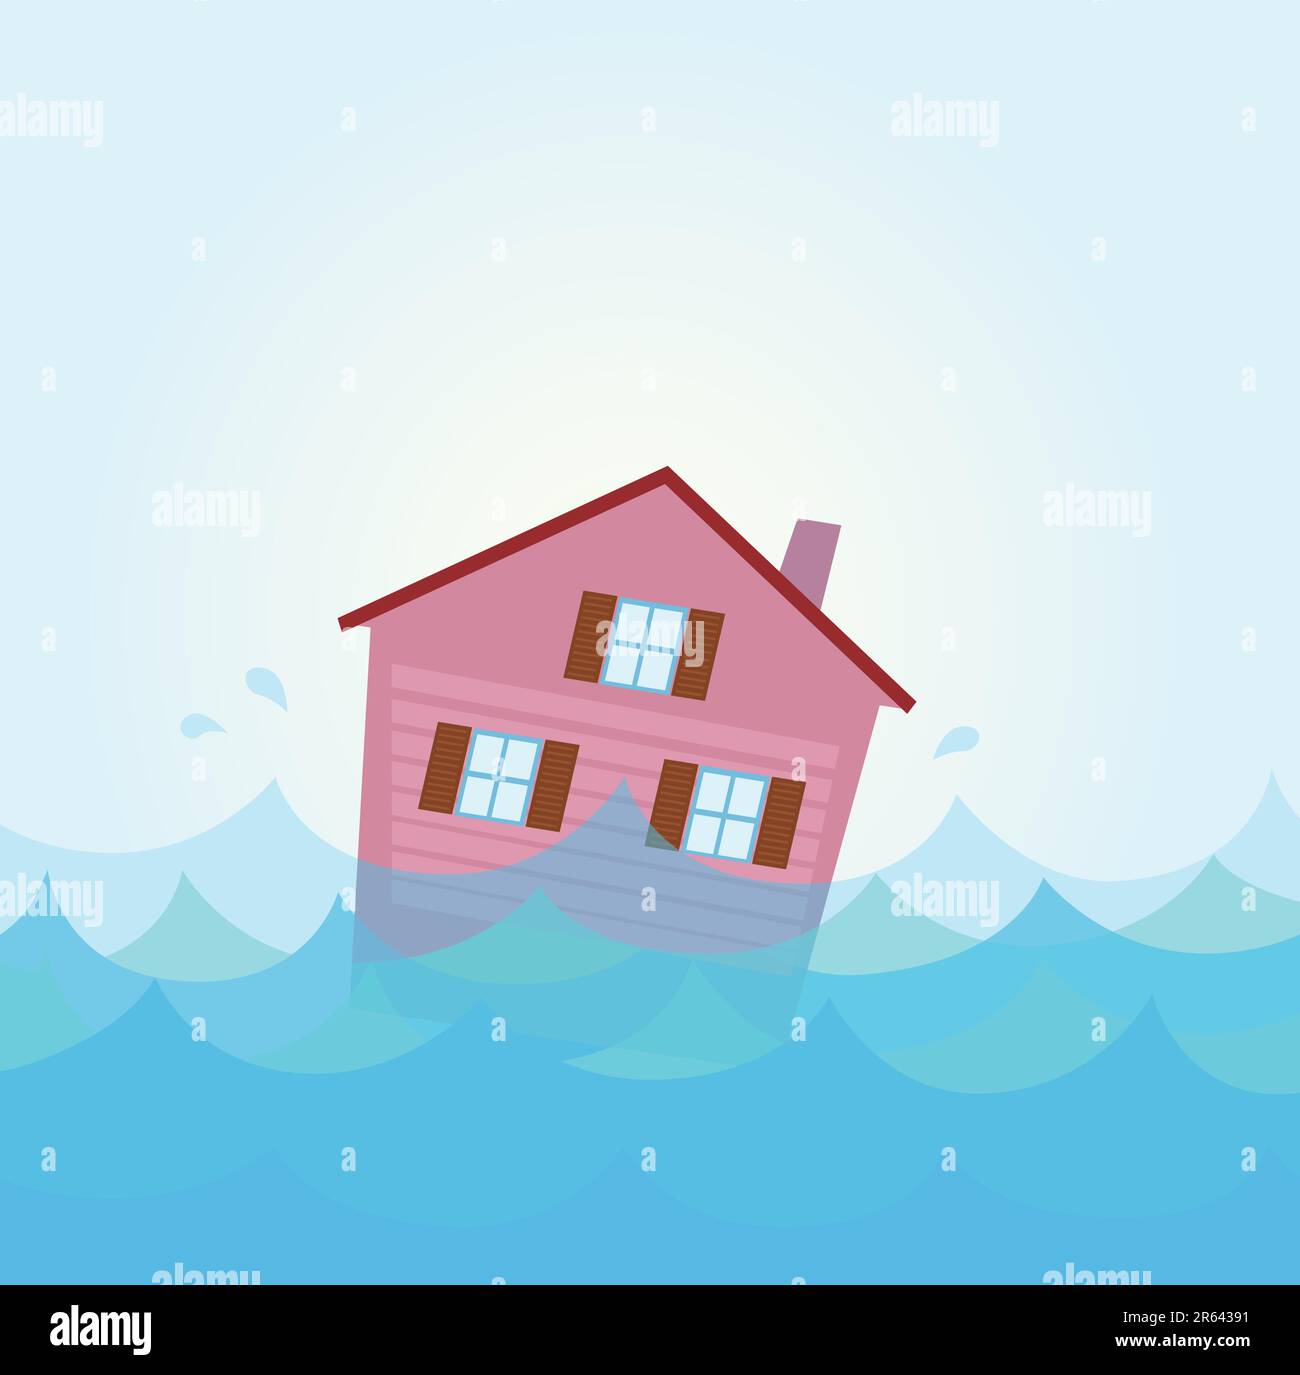 Illustration of house flood. Vector Illustration of sinking house in the river / lake in cartoon style. Stock Vector